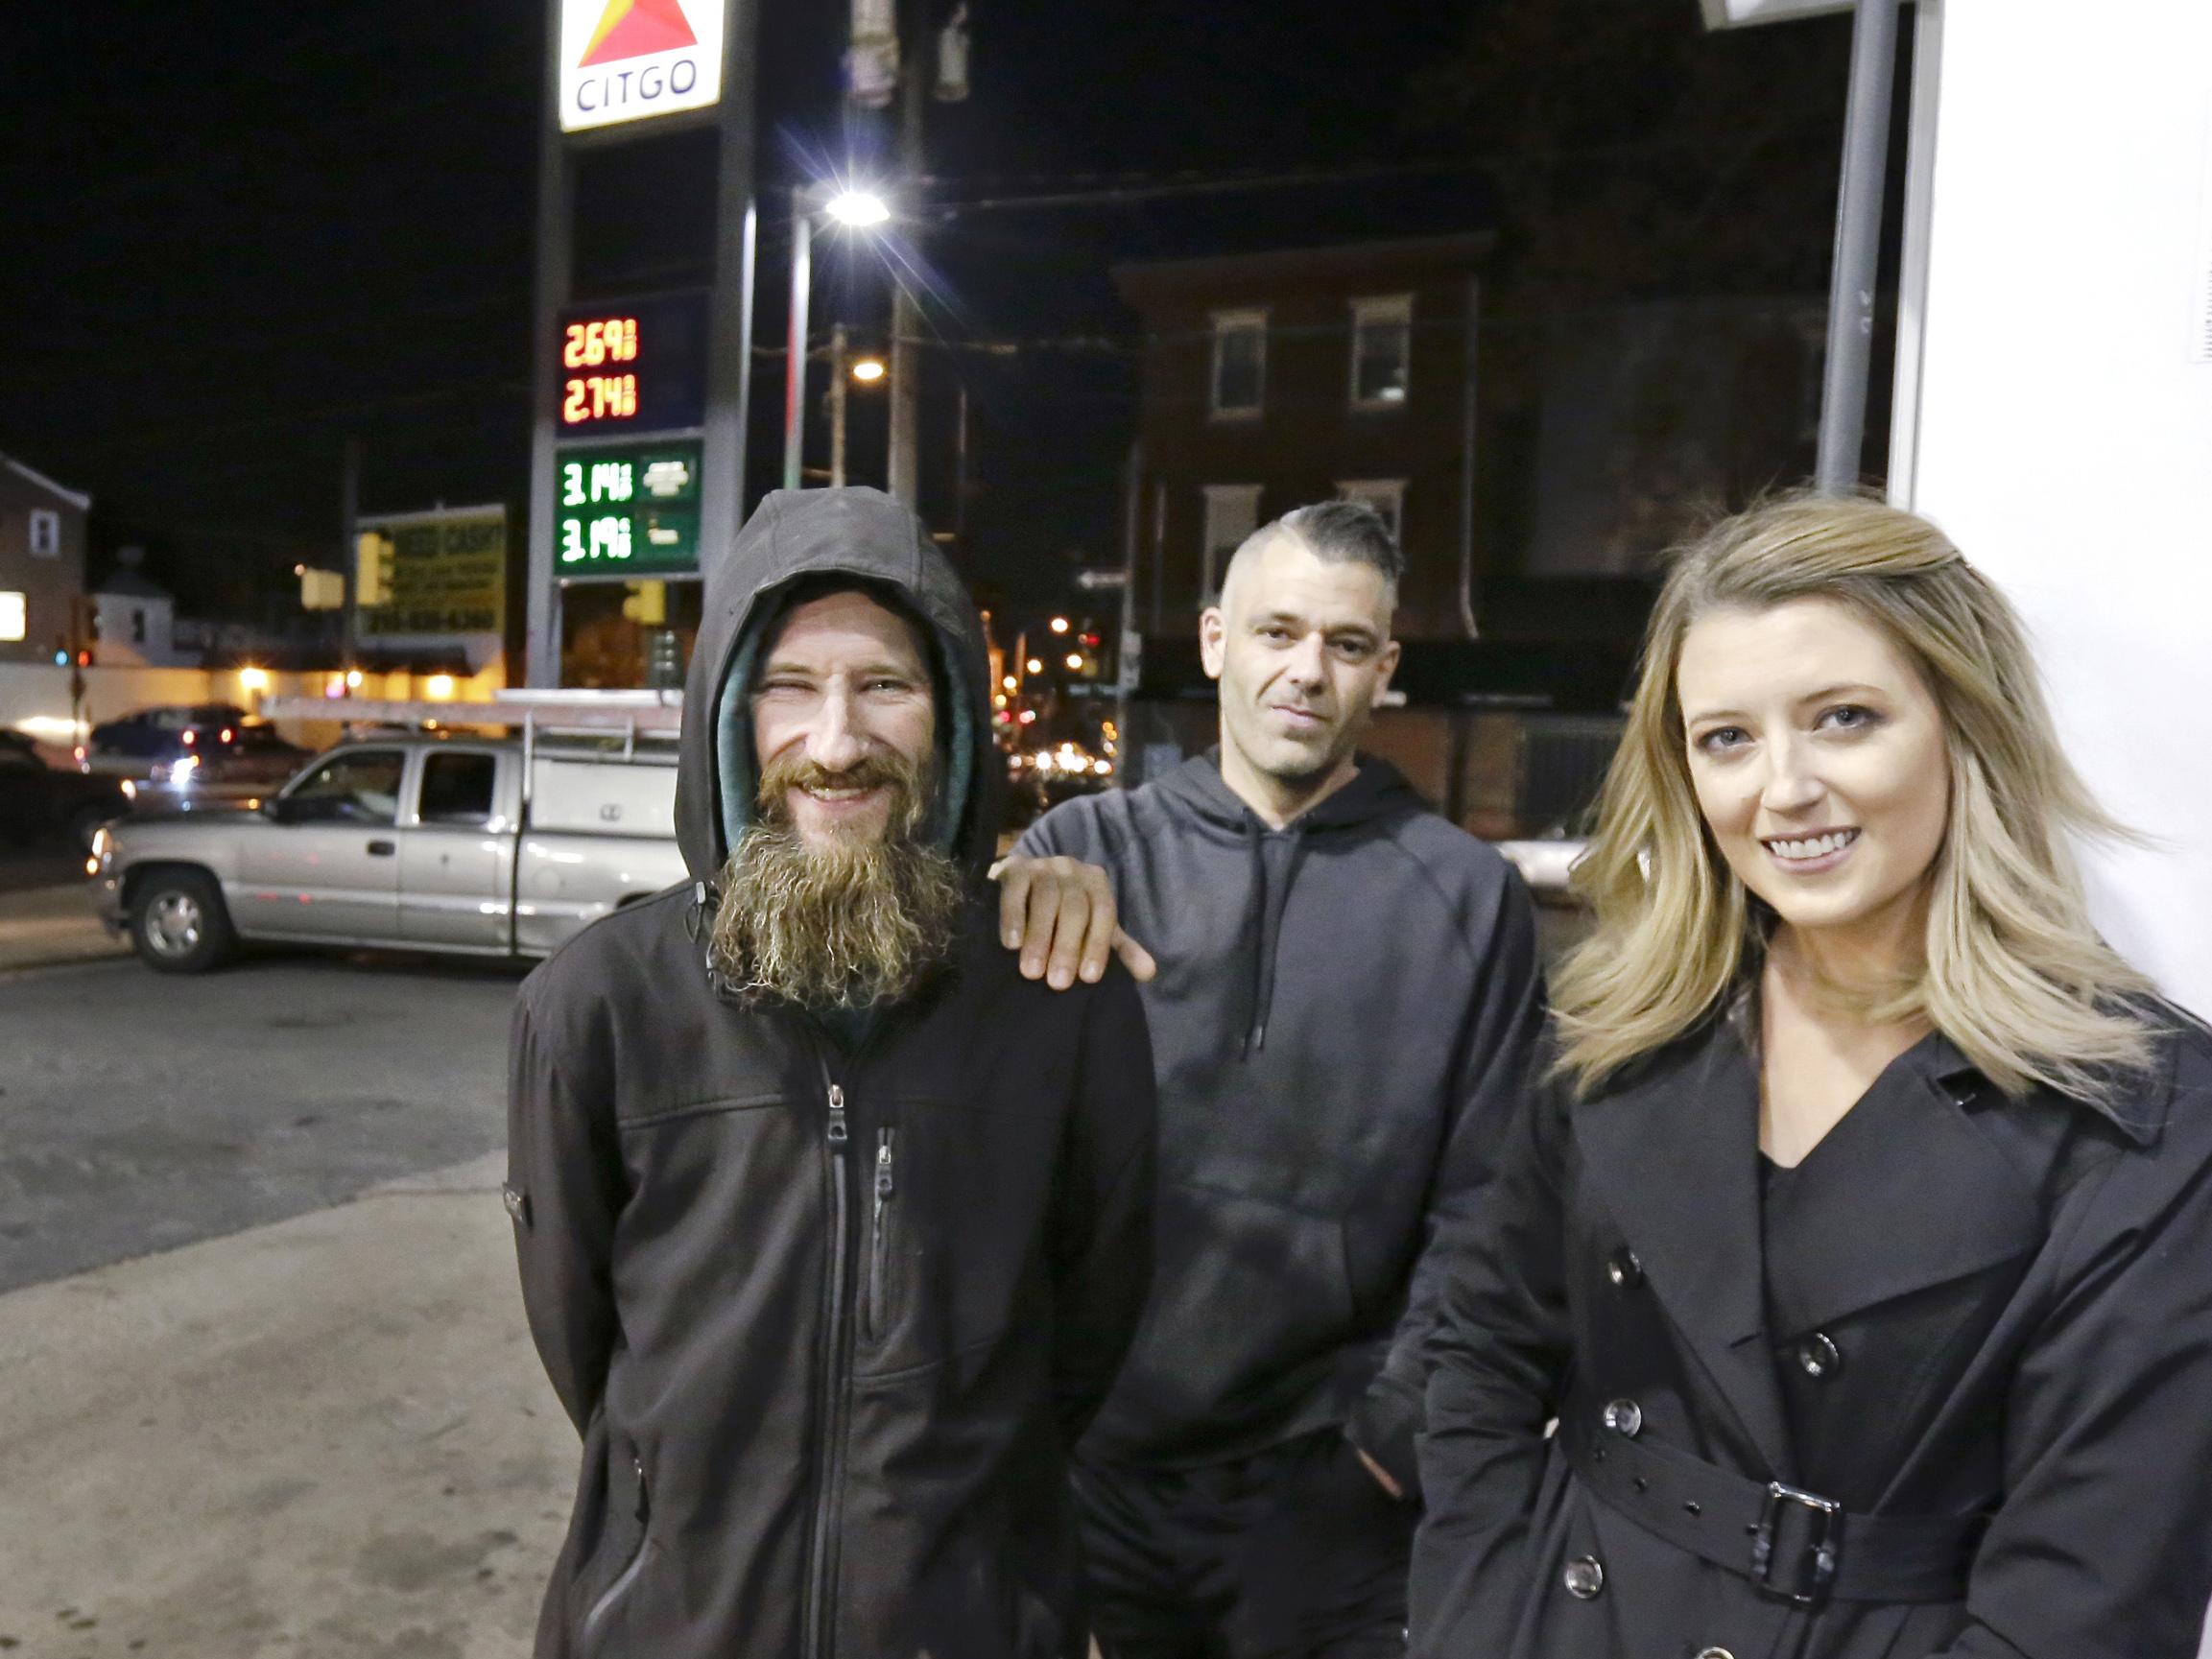 Johnny Bobbitt Jr, left, Kate McClure, right, and McClure's boyfriend Mark D'Amico pose at a Citgo station in Philadelphia. When McClure ran out of gas, Bobbitt, who is homeless, gave his last $20 to buy gas for her. McClure started a Gofundme.com campaign for Bobbitt that has raised more than $13,000